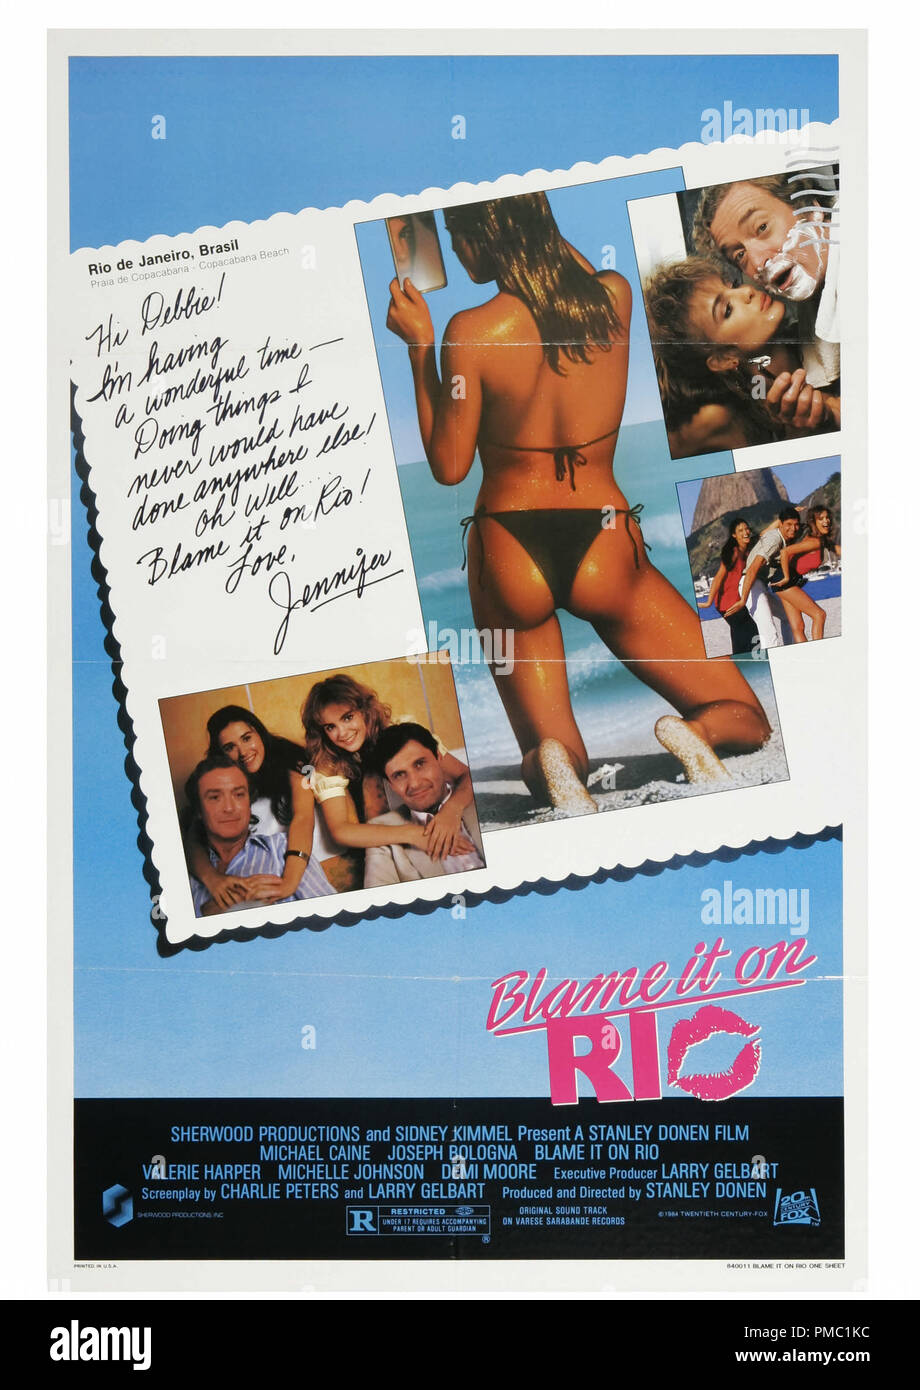 Michael Caine,  Blame It on Rio (20th Century Fox, 1984). Poster  File Reference # 33595 554THA Stock Photo